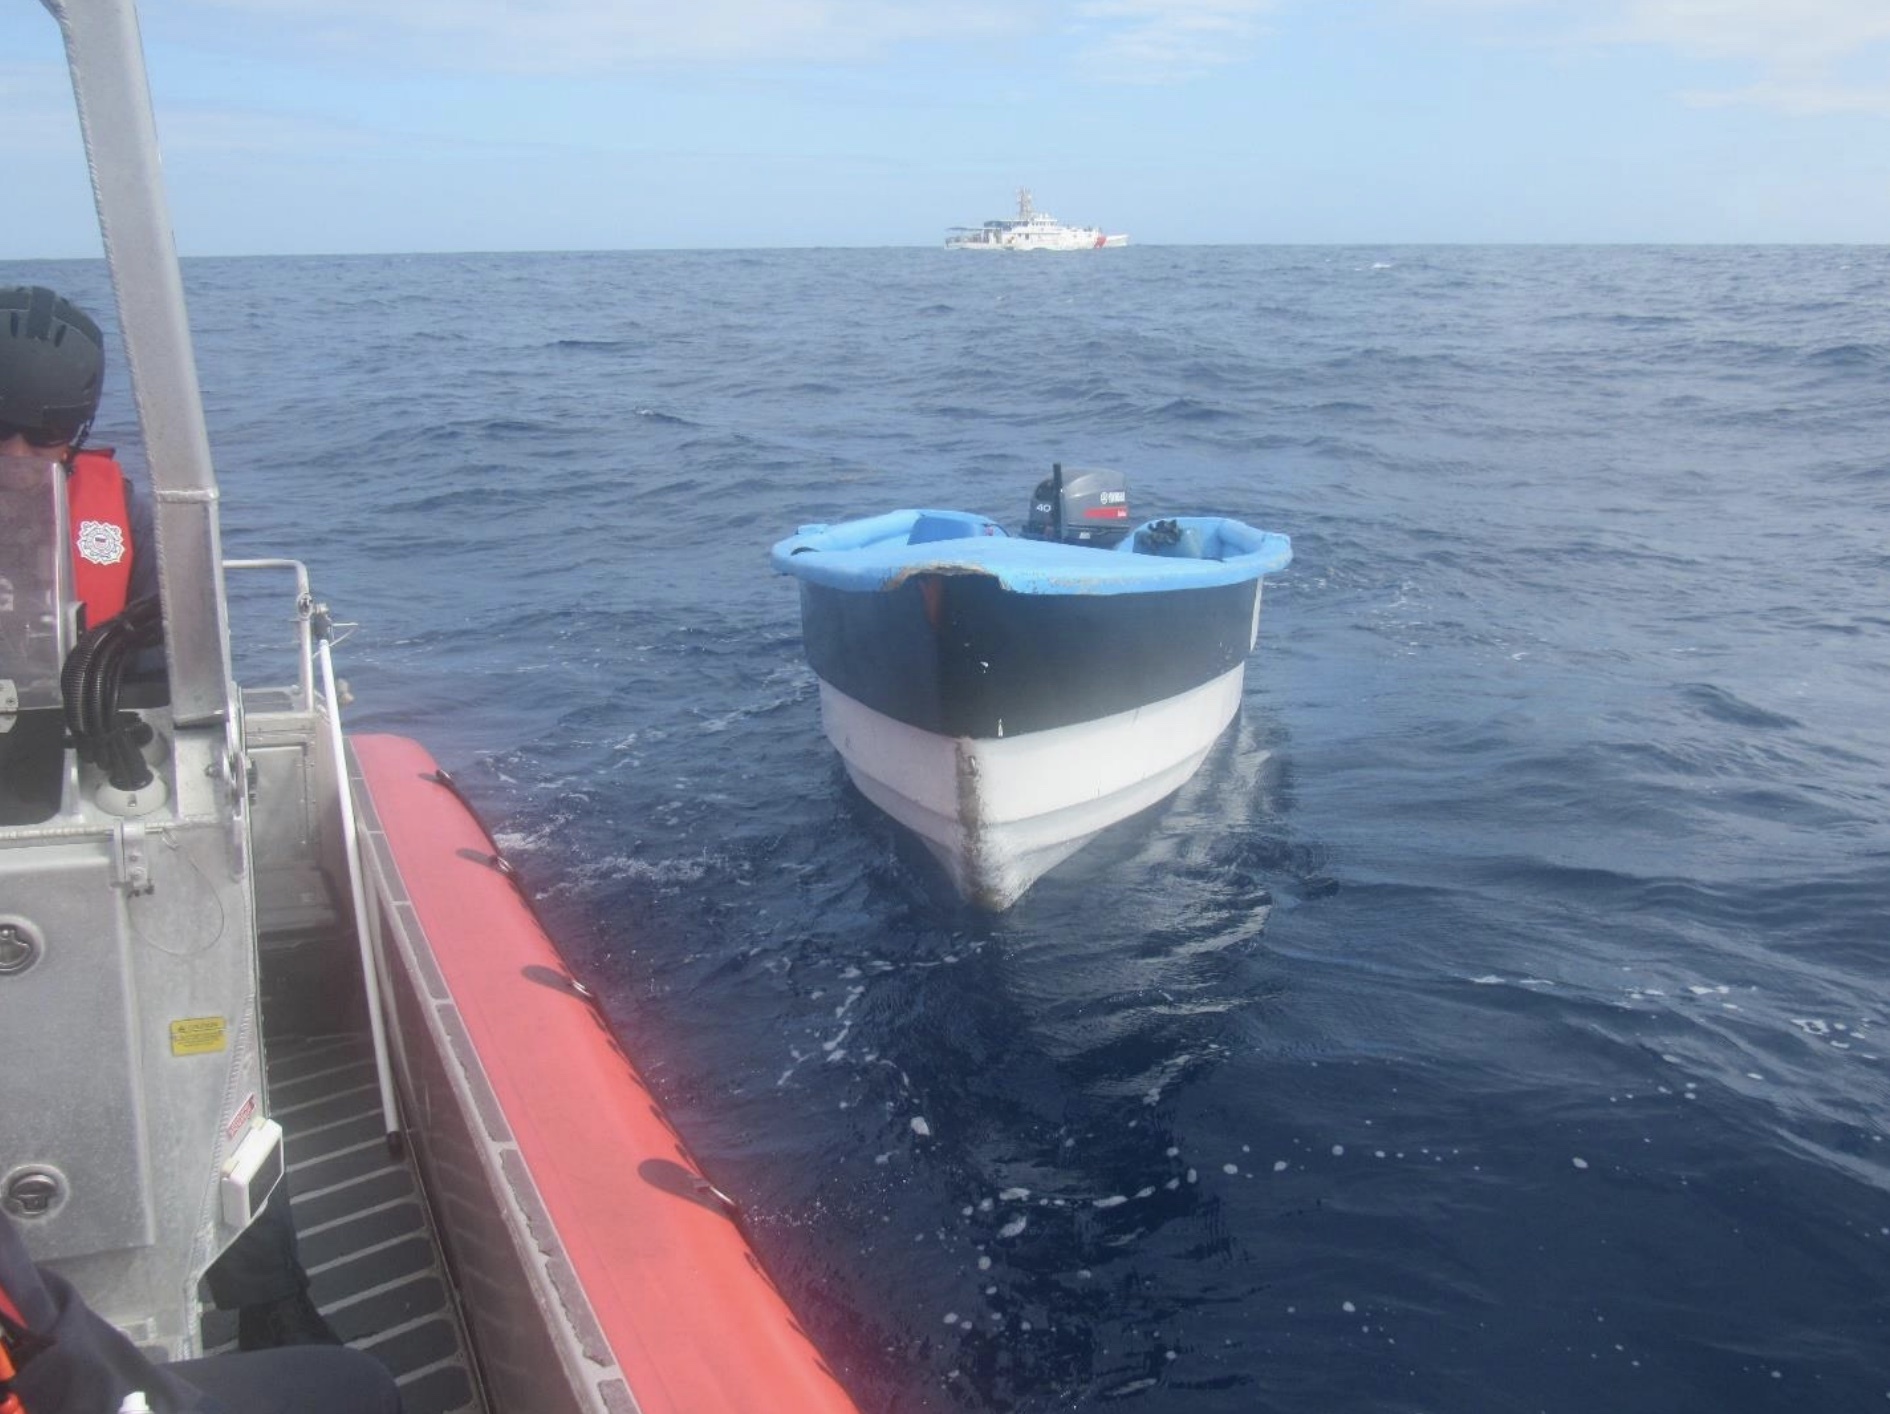 Coast Guard repatriates 58 Dominican nationals, following the interdiction of 2 illegal voyages